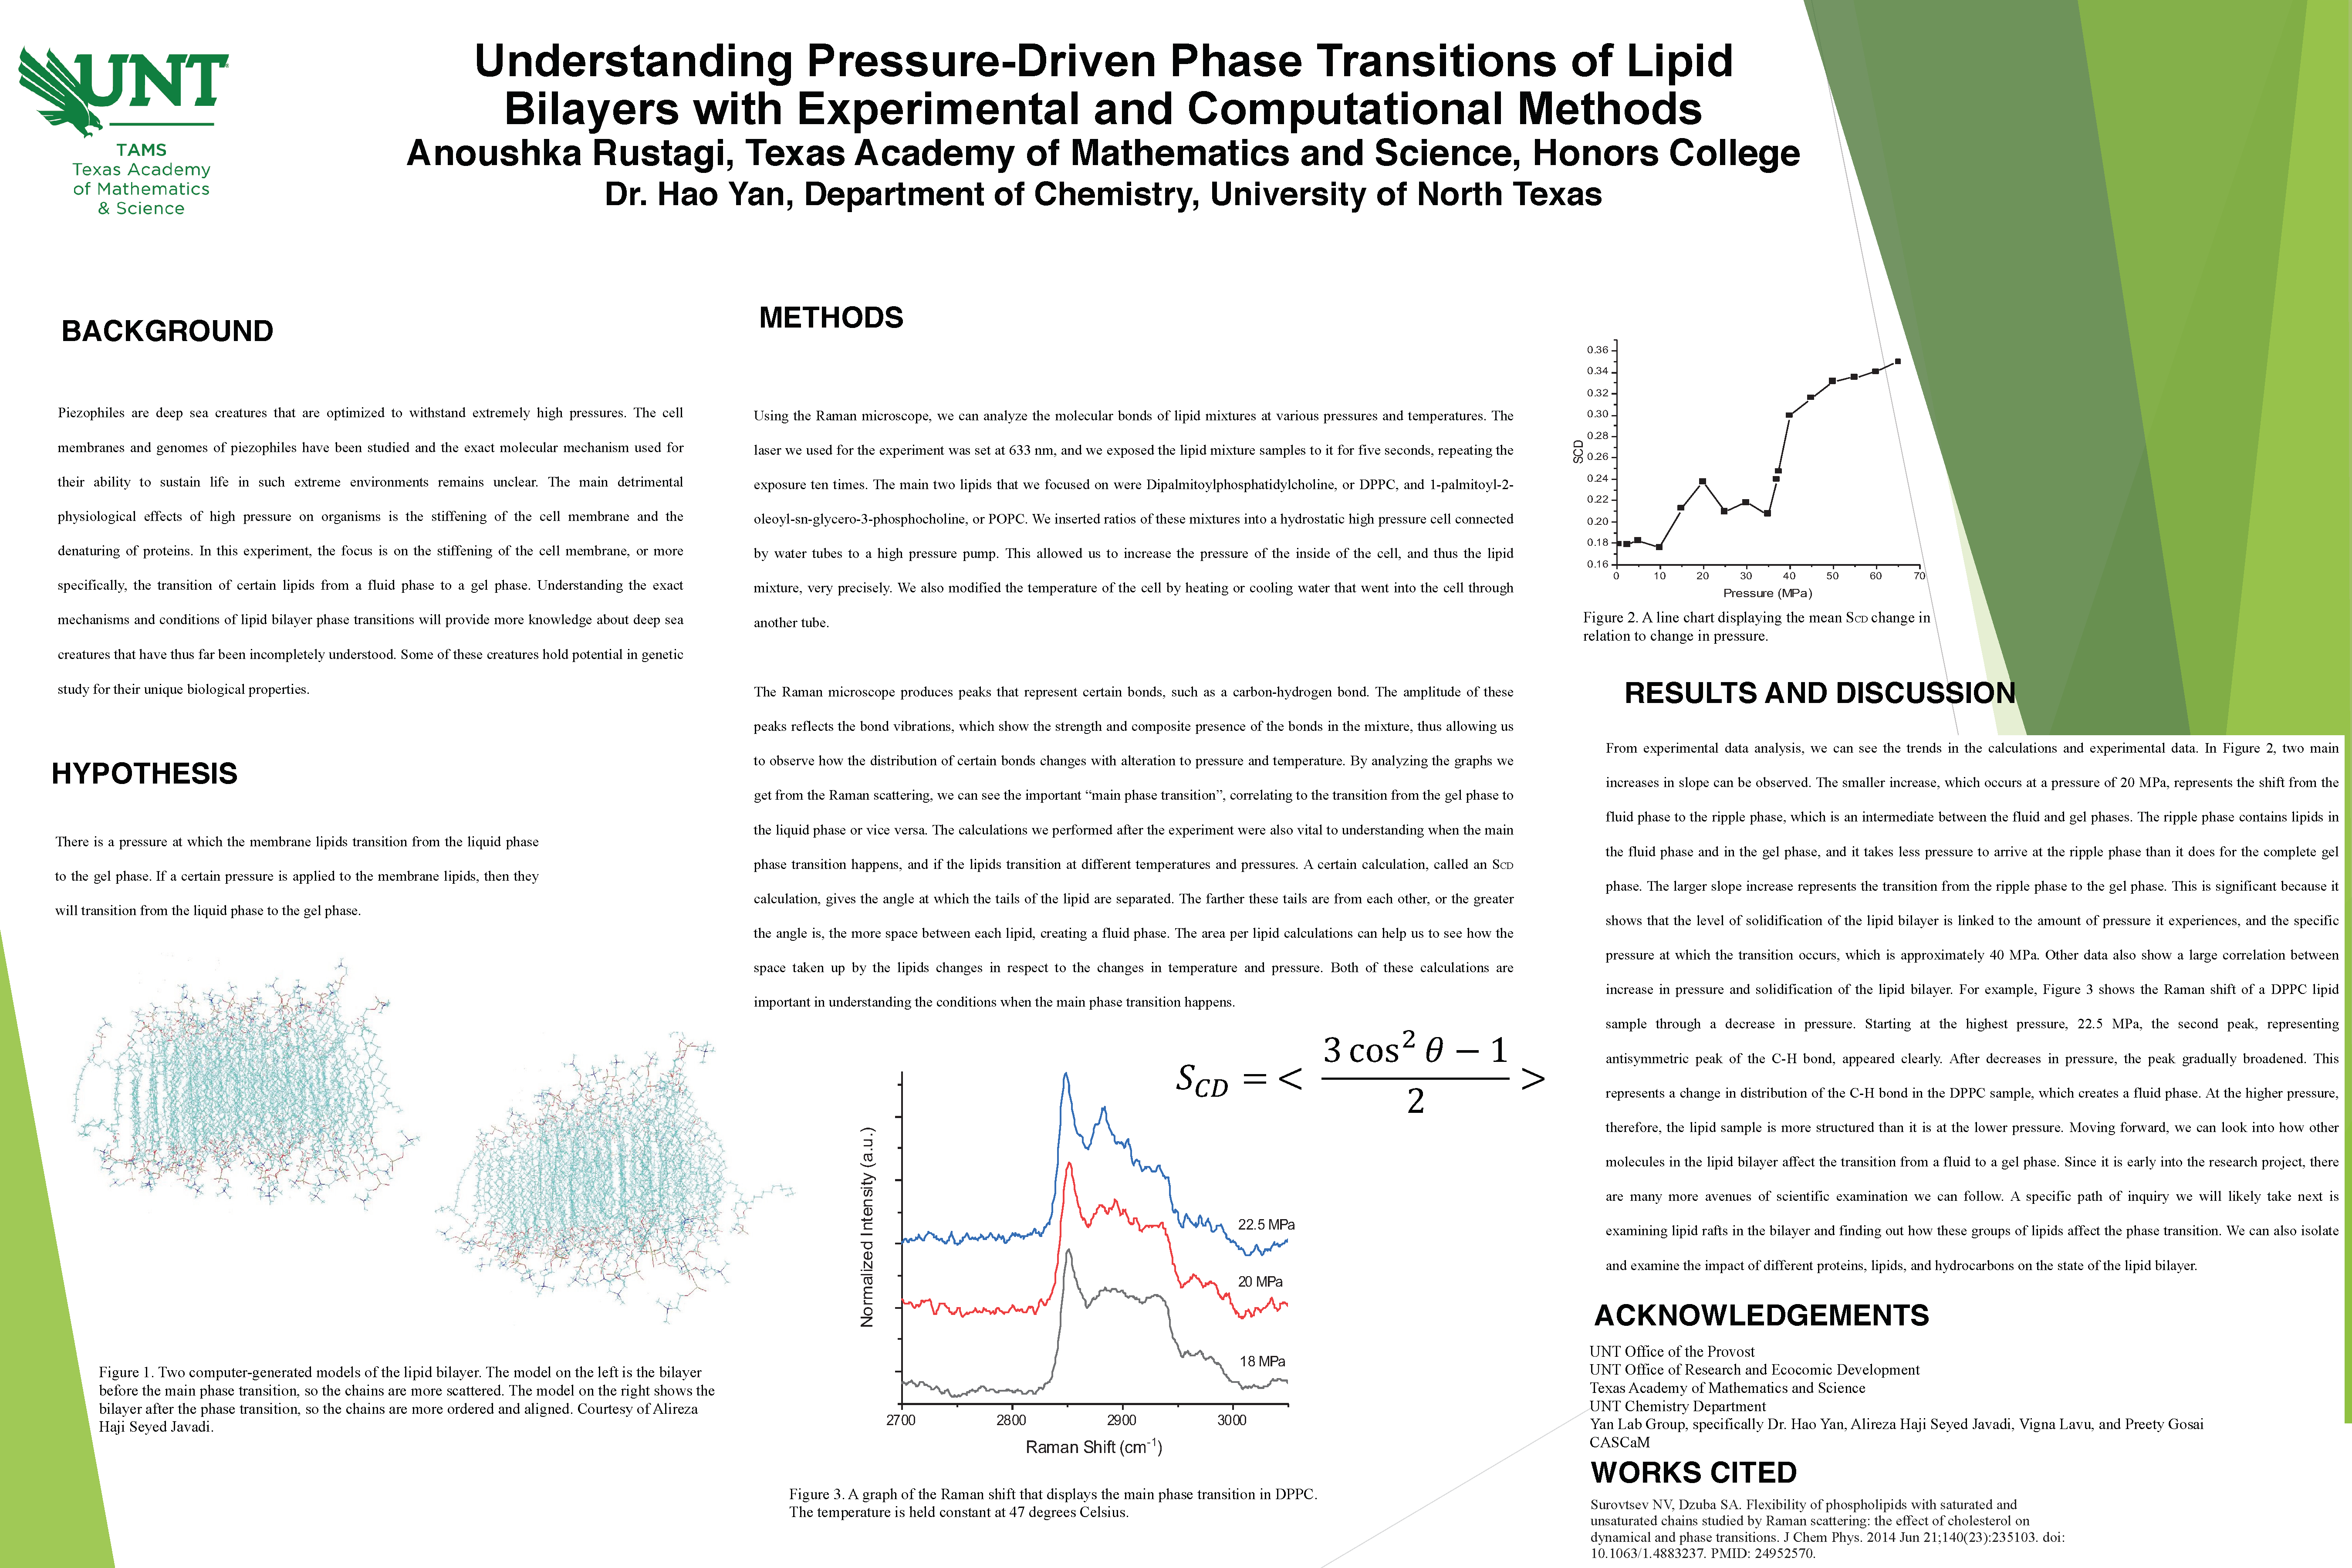 Understanding Pressure-Driven Phase Transitions of Lipid Bilayers with Experimental and Computationa